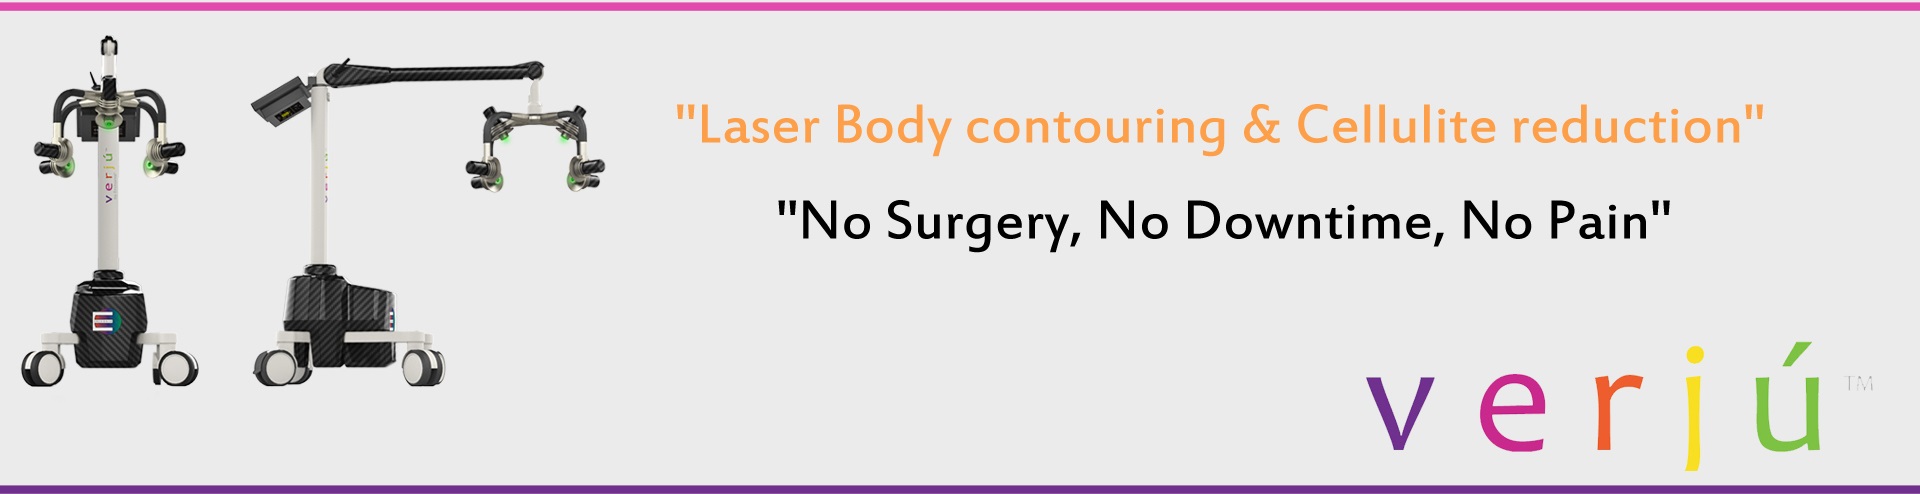 Laser Body contouring & Cellulite reduction